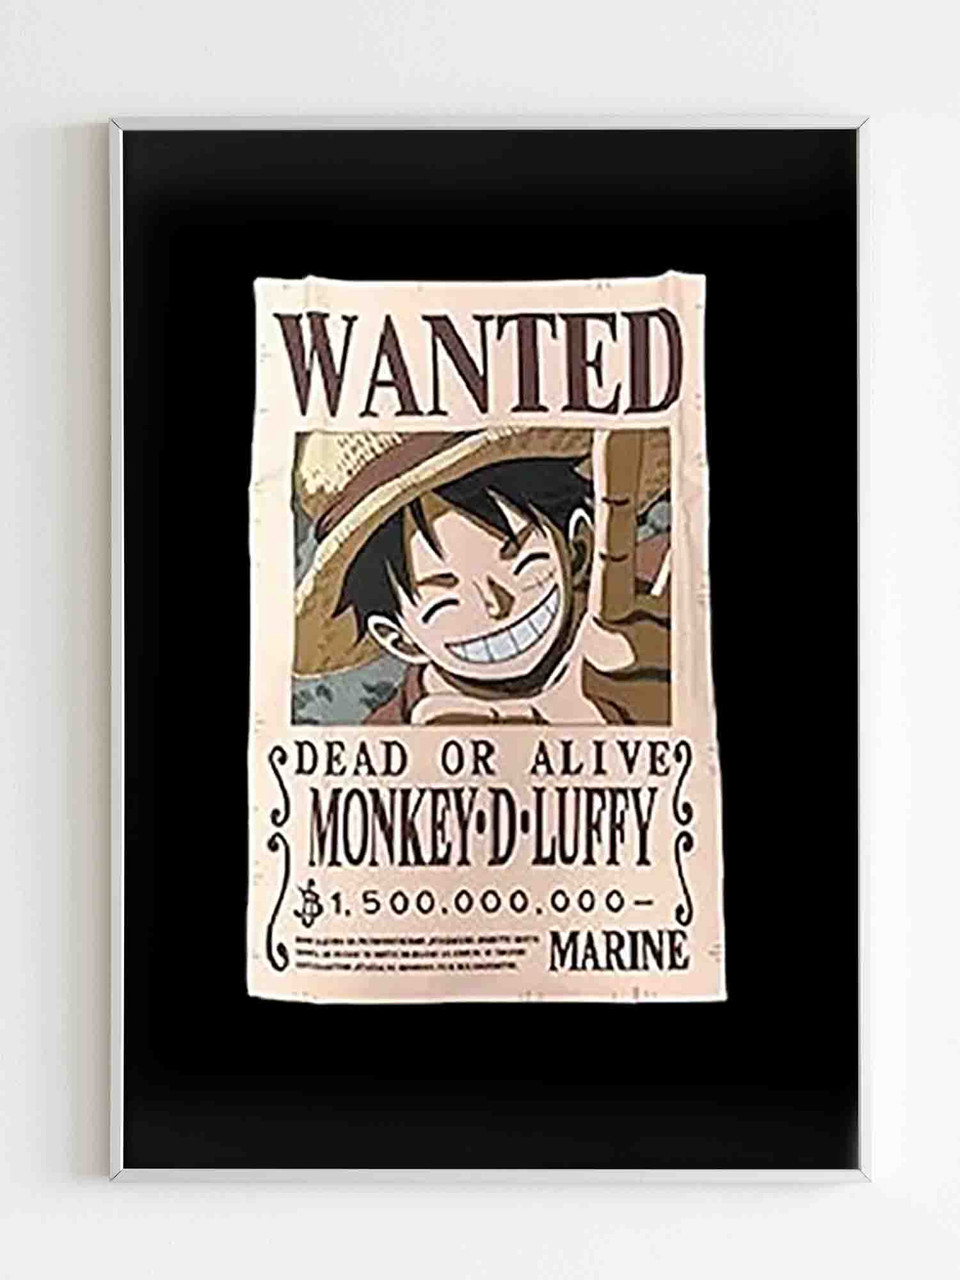 https://cdn11.bigcommerce.com/s-fbh9rcmv2i/images/stencil/1280x1280/products/179974/209757/One_Piece_Luffy_Bounty__93101.1664433919.jpg?c=1